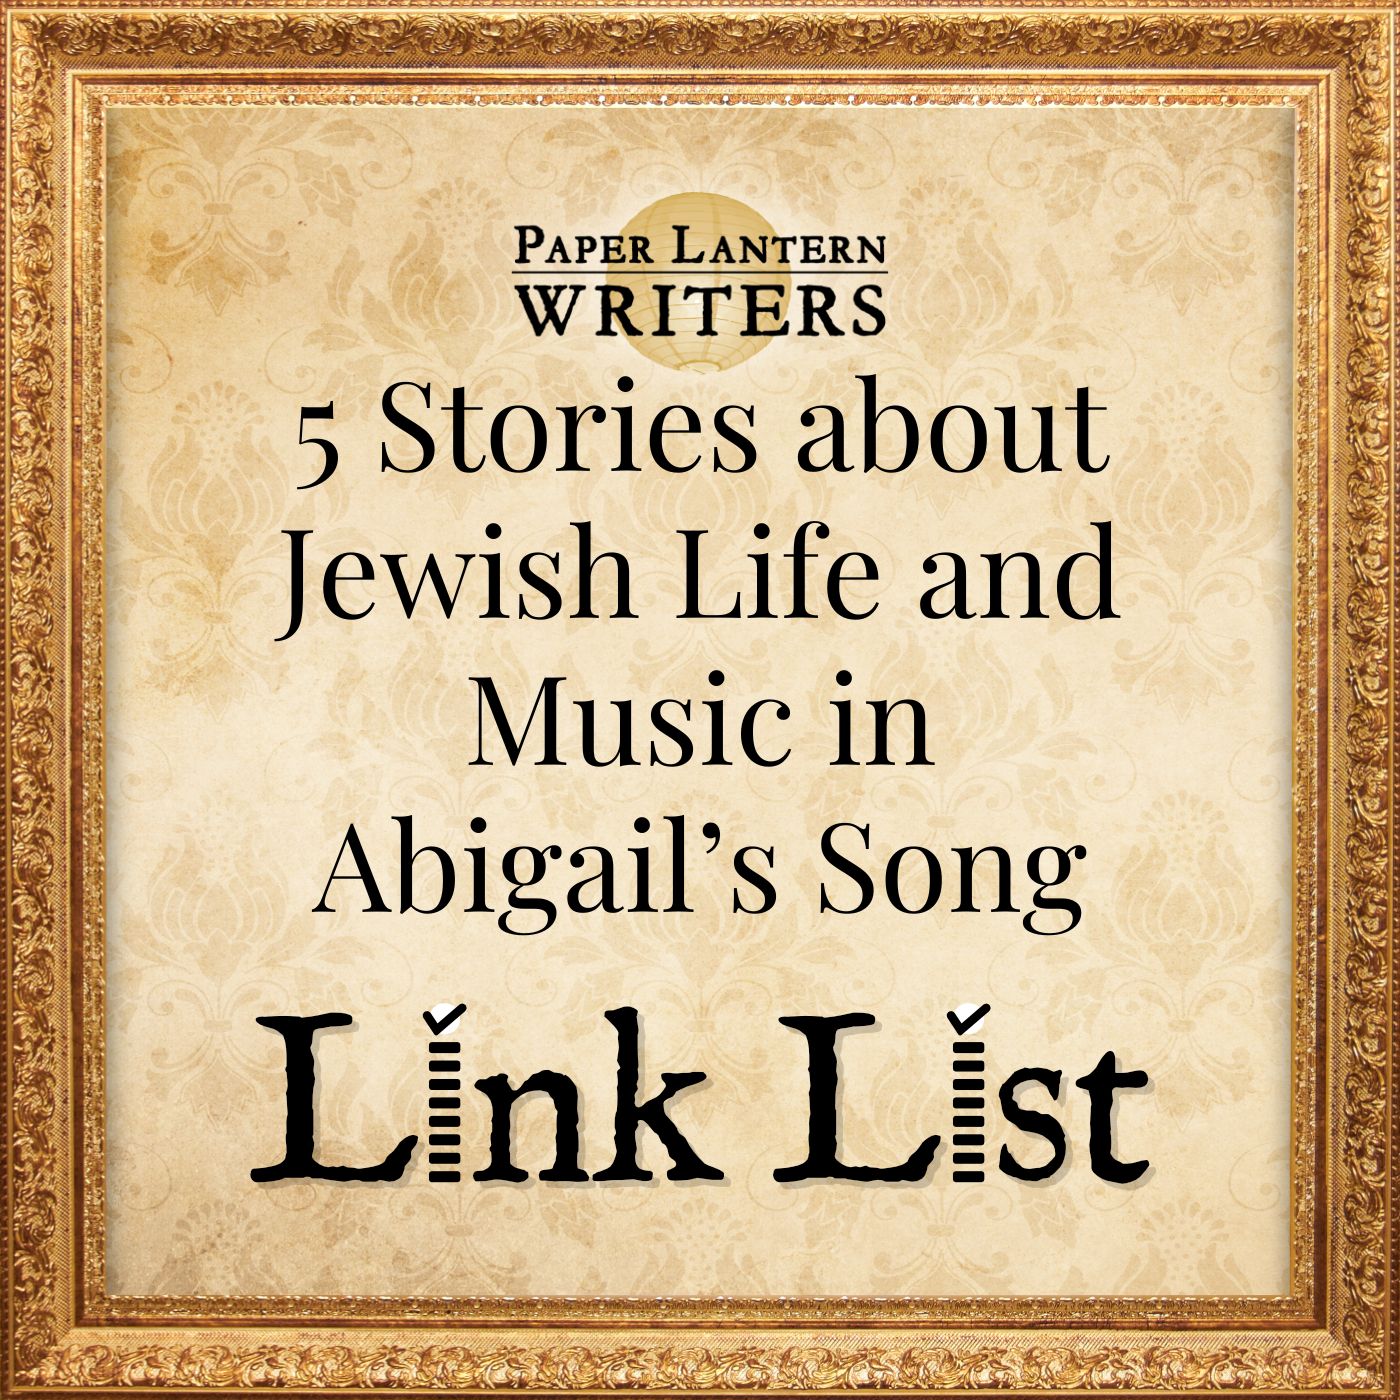 5 Stories about Jewish Life and Music in Abigail’s Song